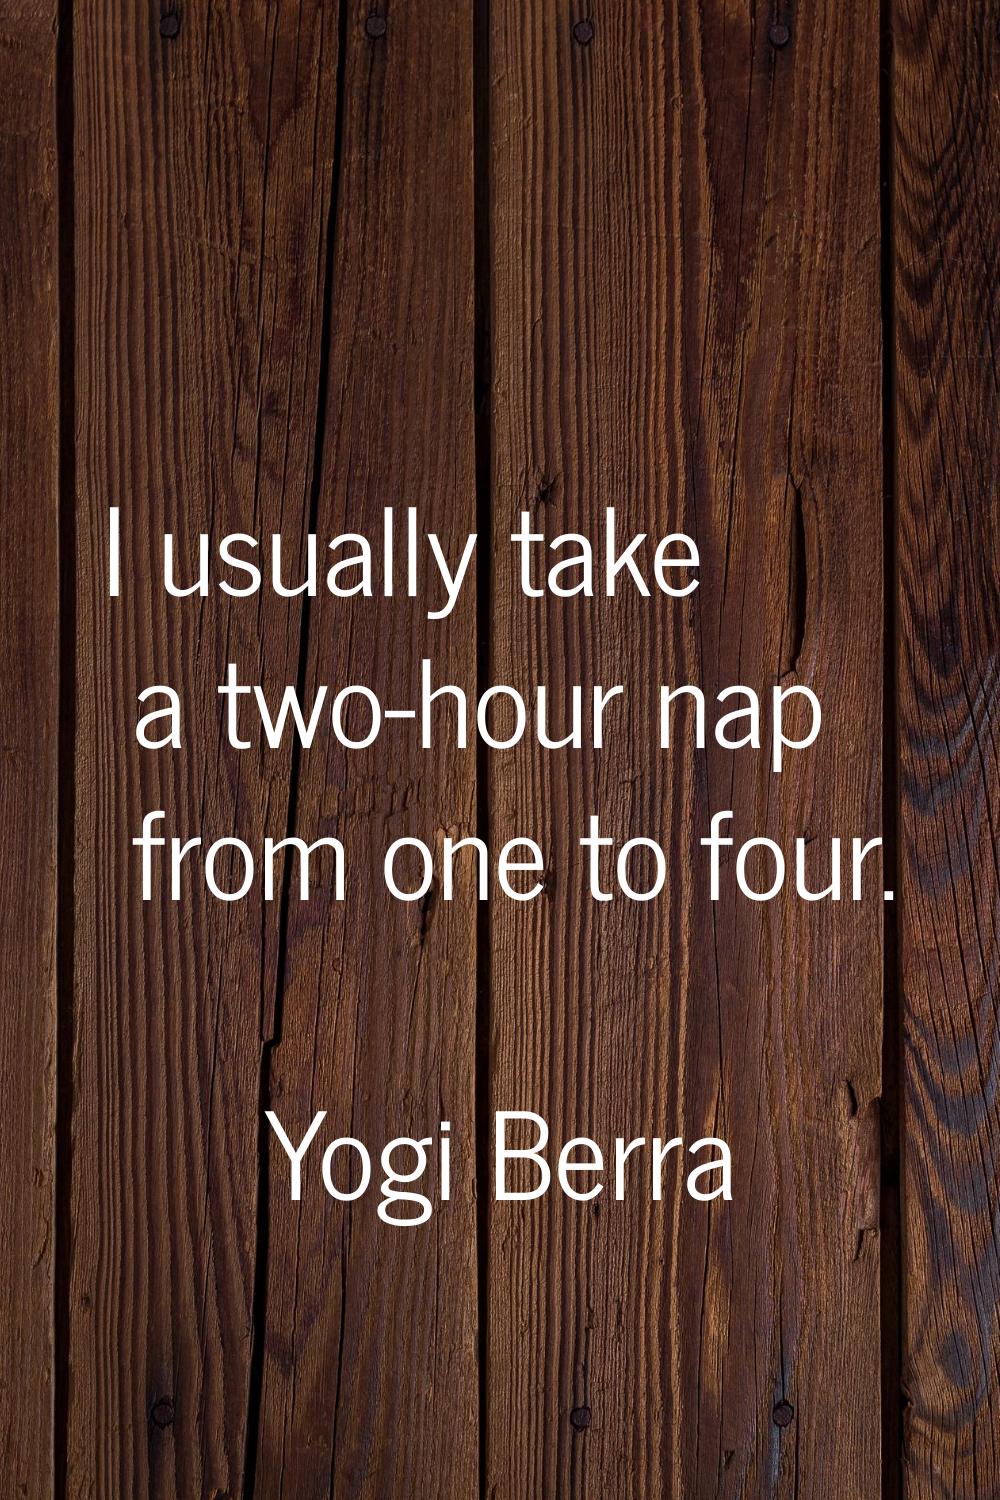 I usually take a two-hour nap from one to four.